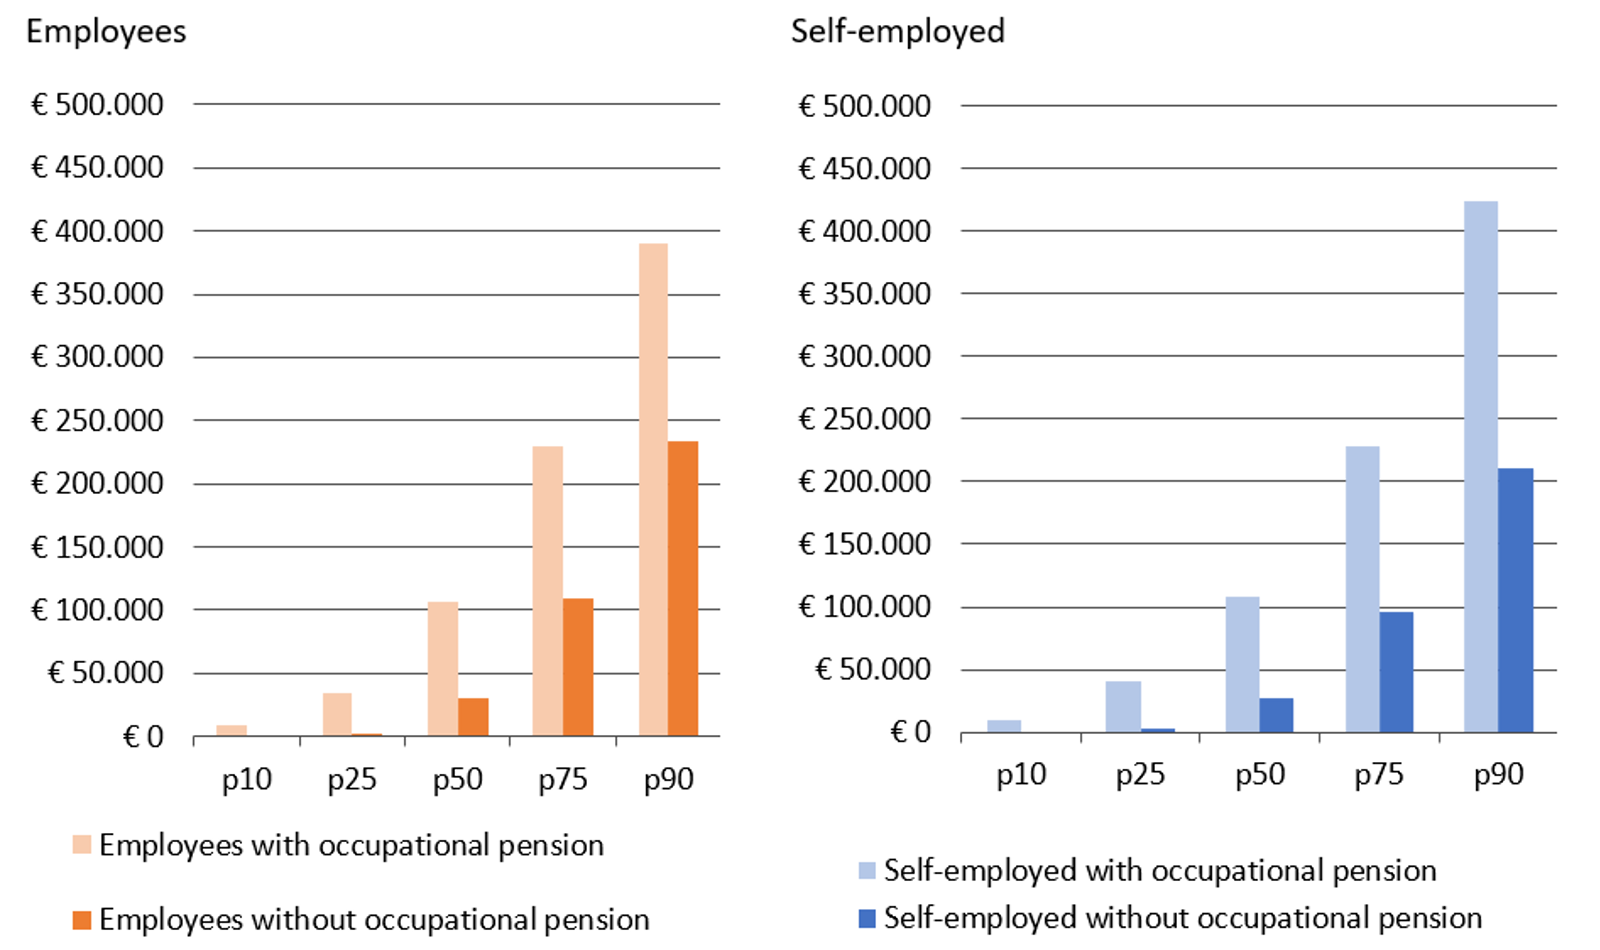 Future discounted value of pension entitlements for 10th, 25th, 50th, 75th and 90th percentile,  by 1) type of employment and 2) occupational pension status